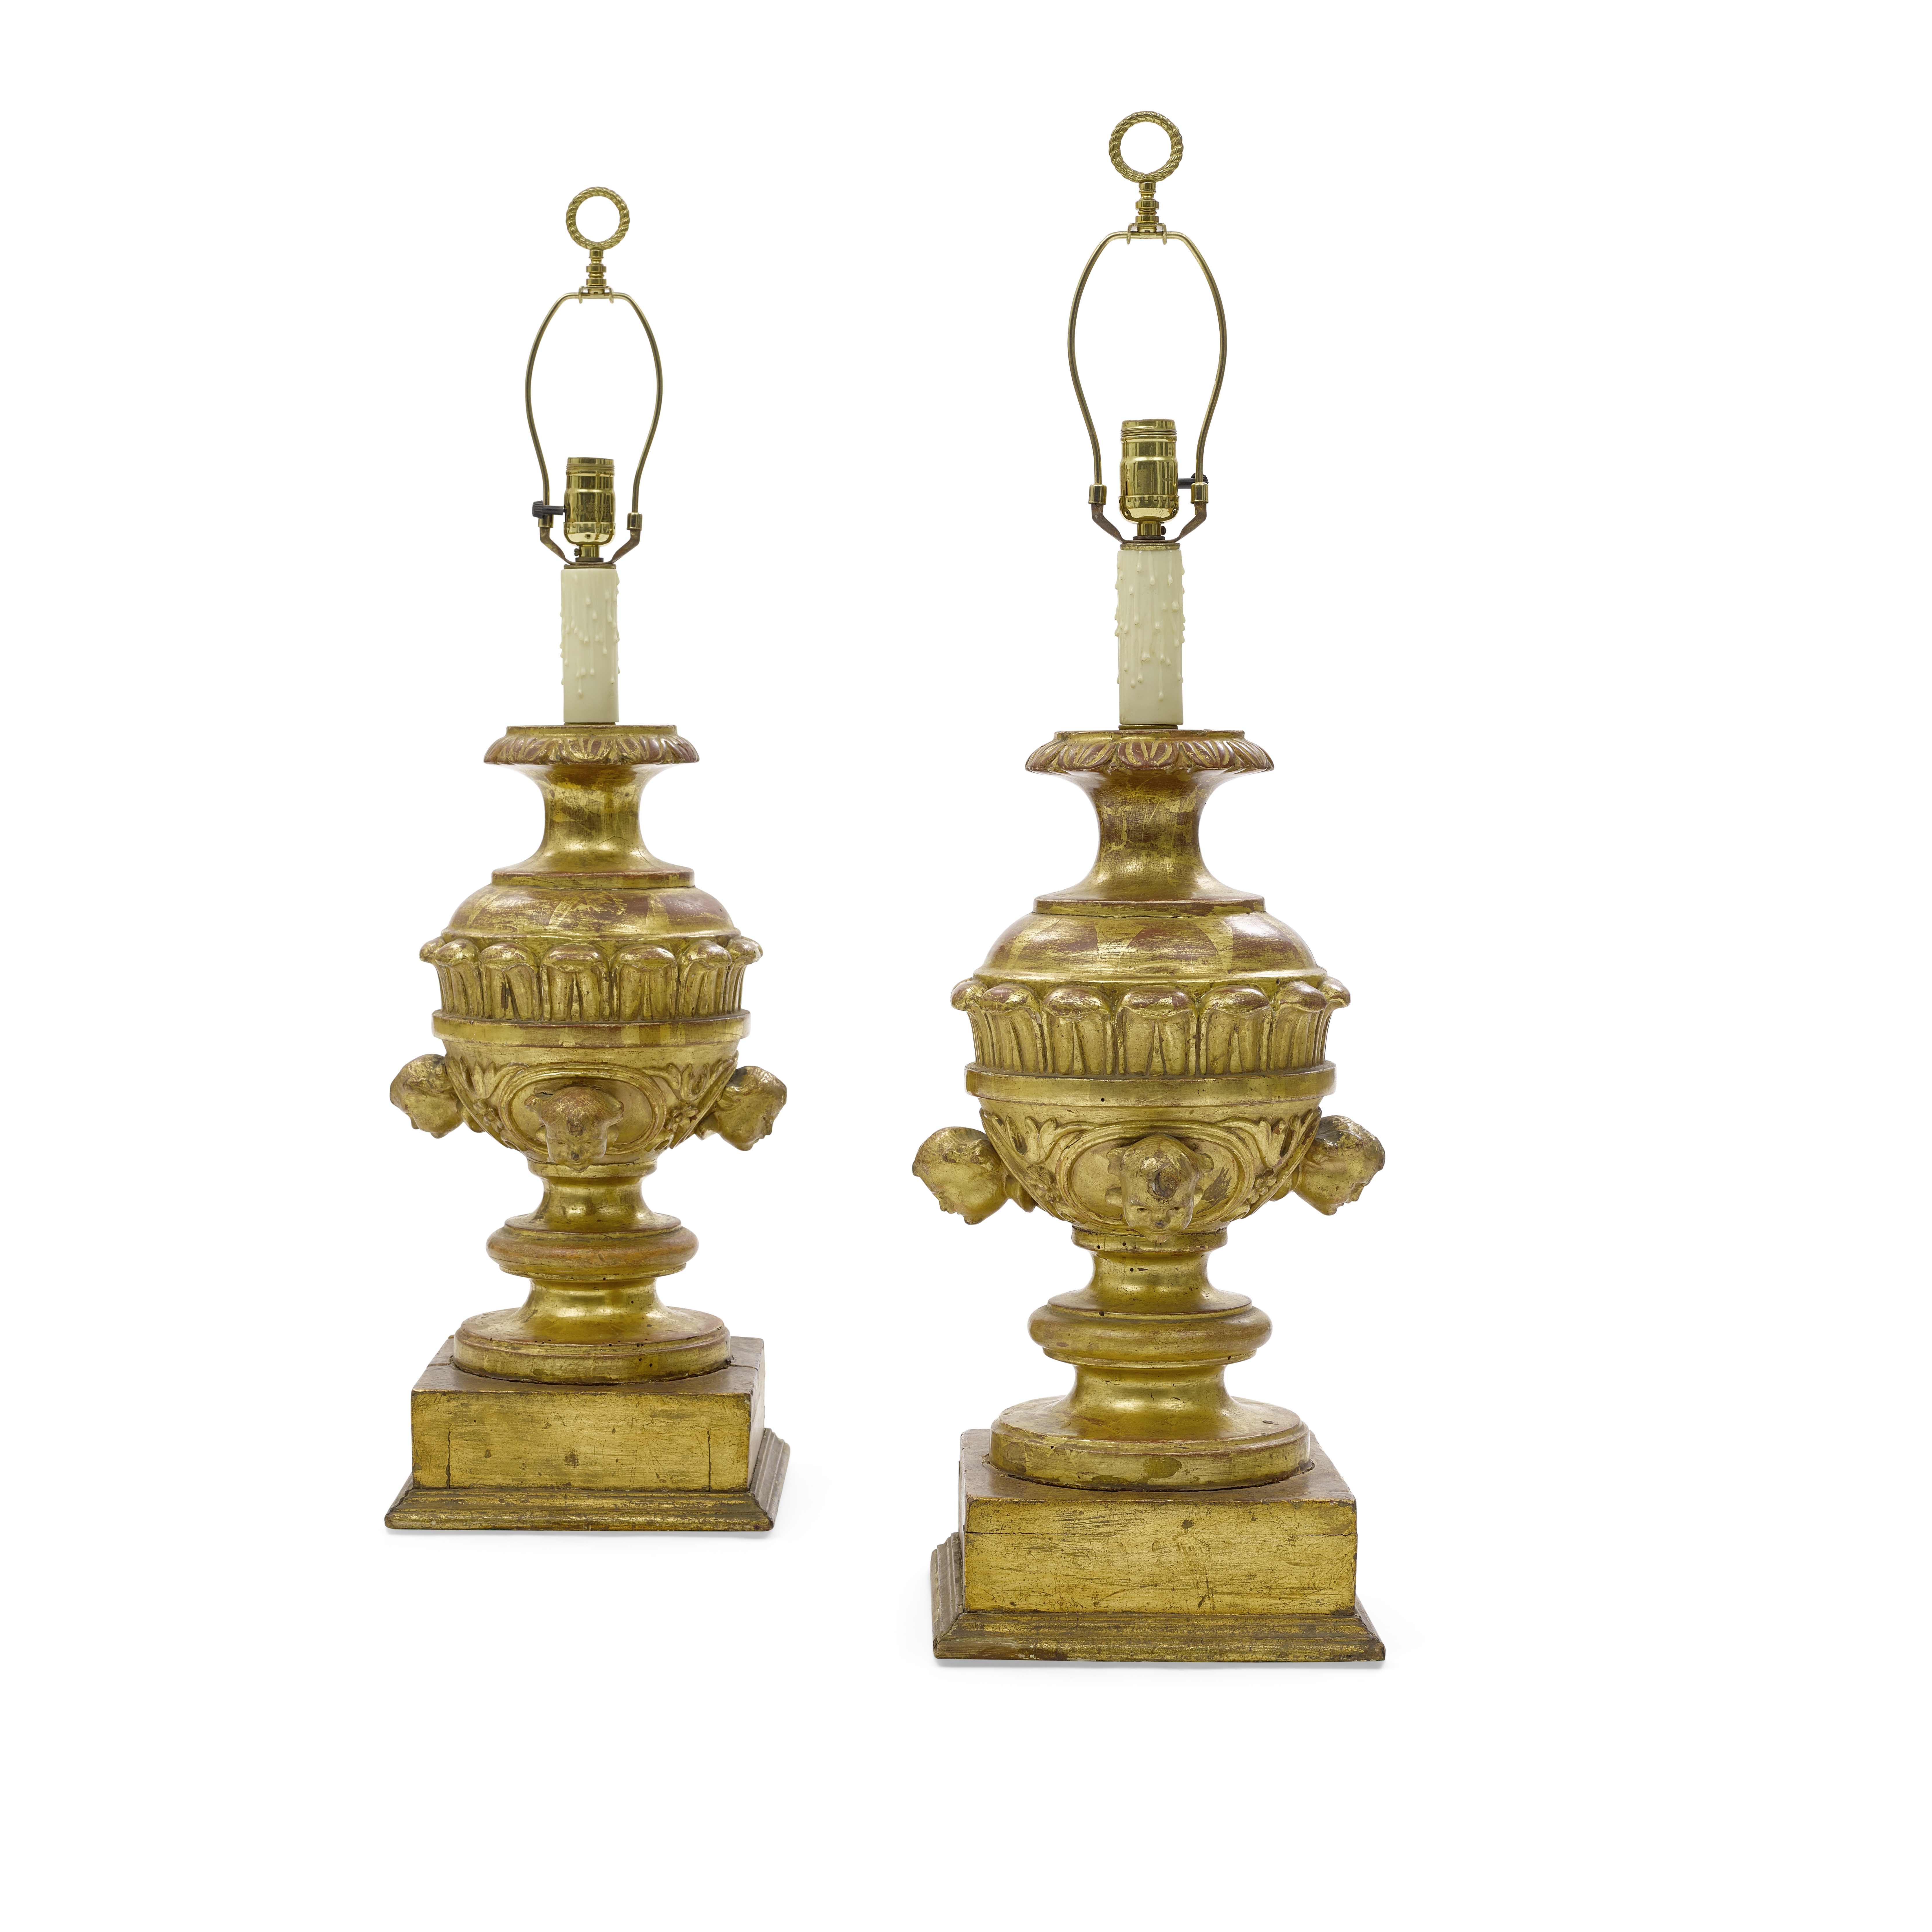 Pair of Baroque Giltwood Urns - Image 2 of 2